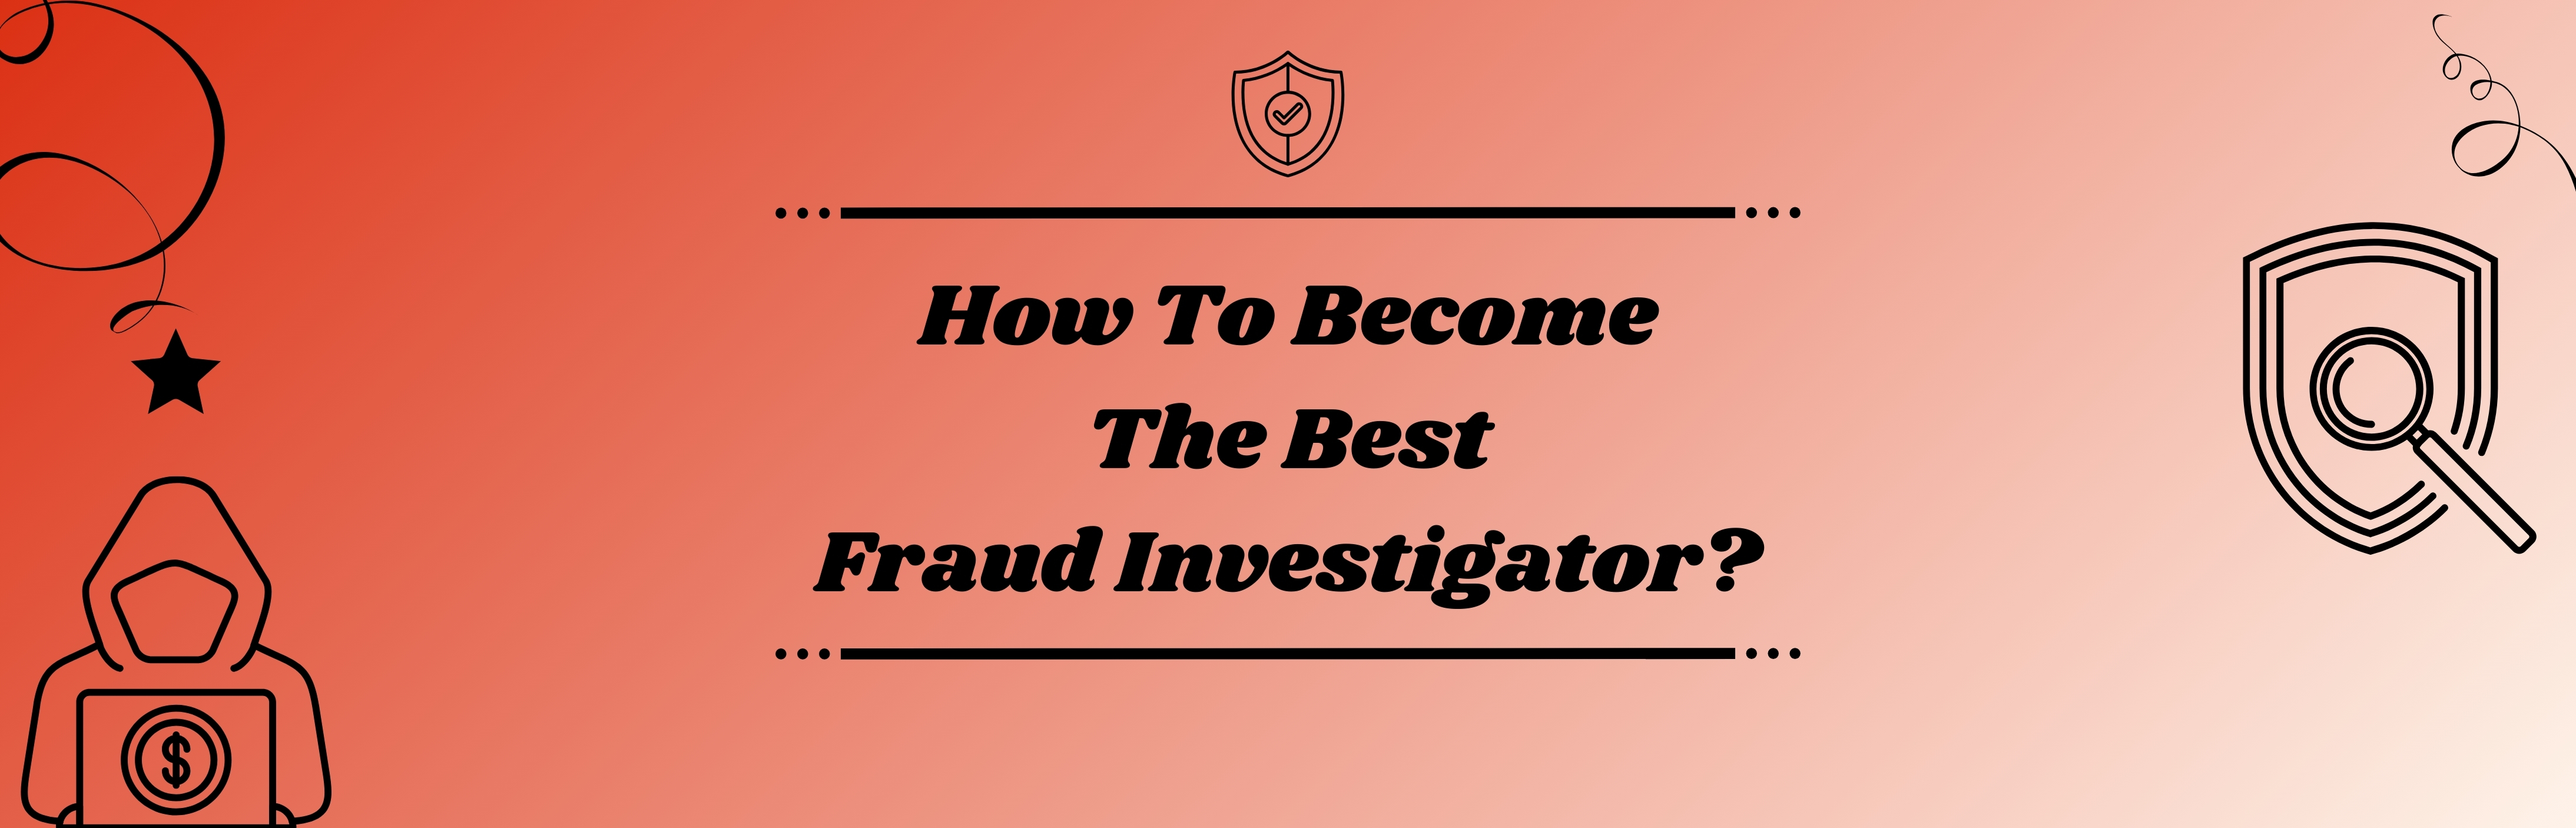 How to Become the Best Fraud Investigator?